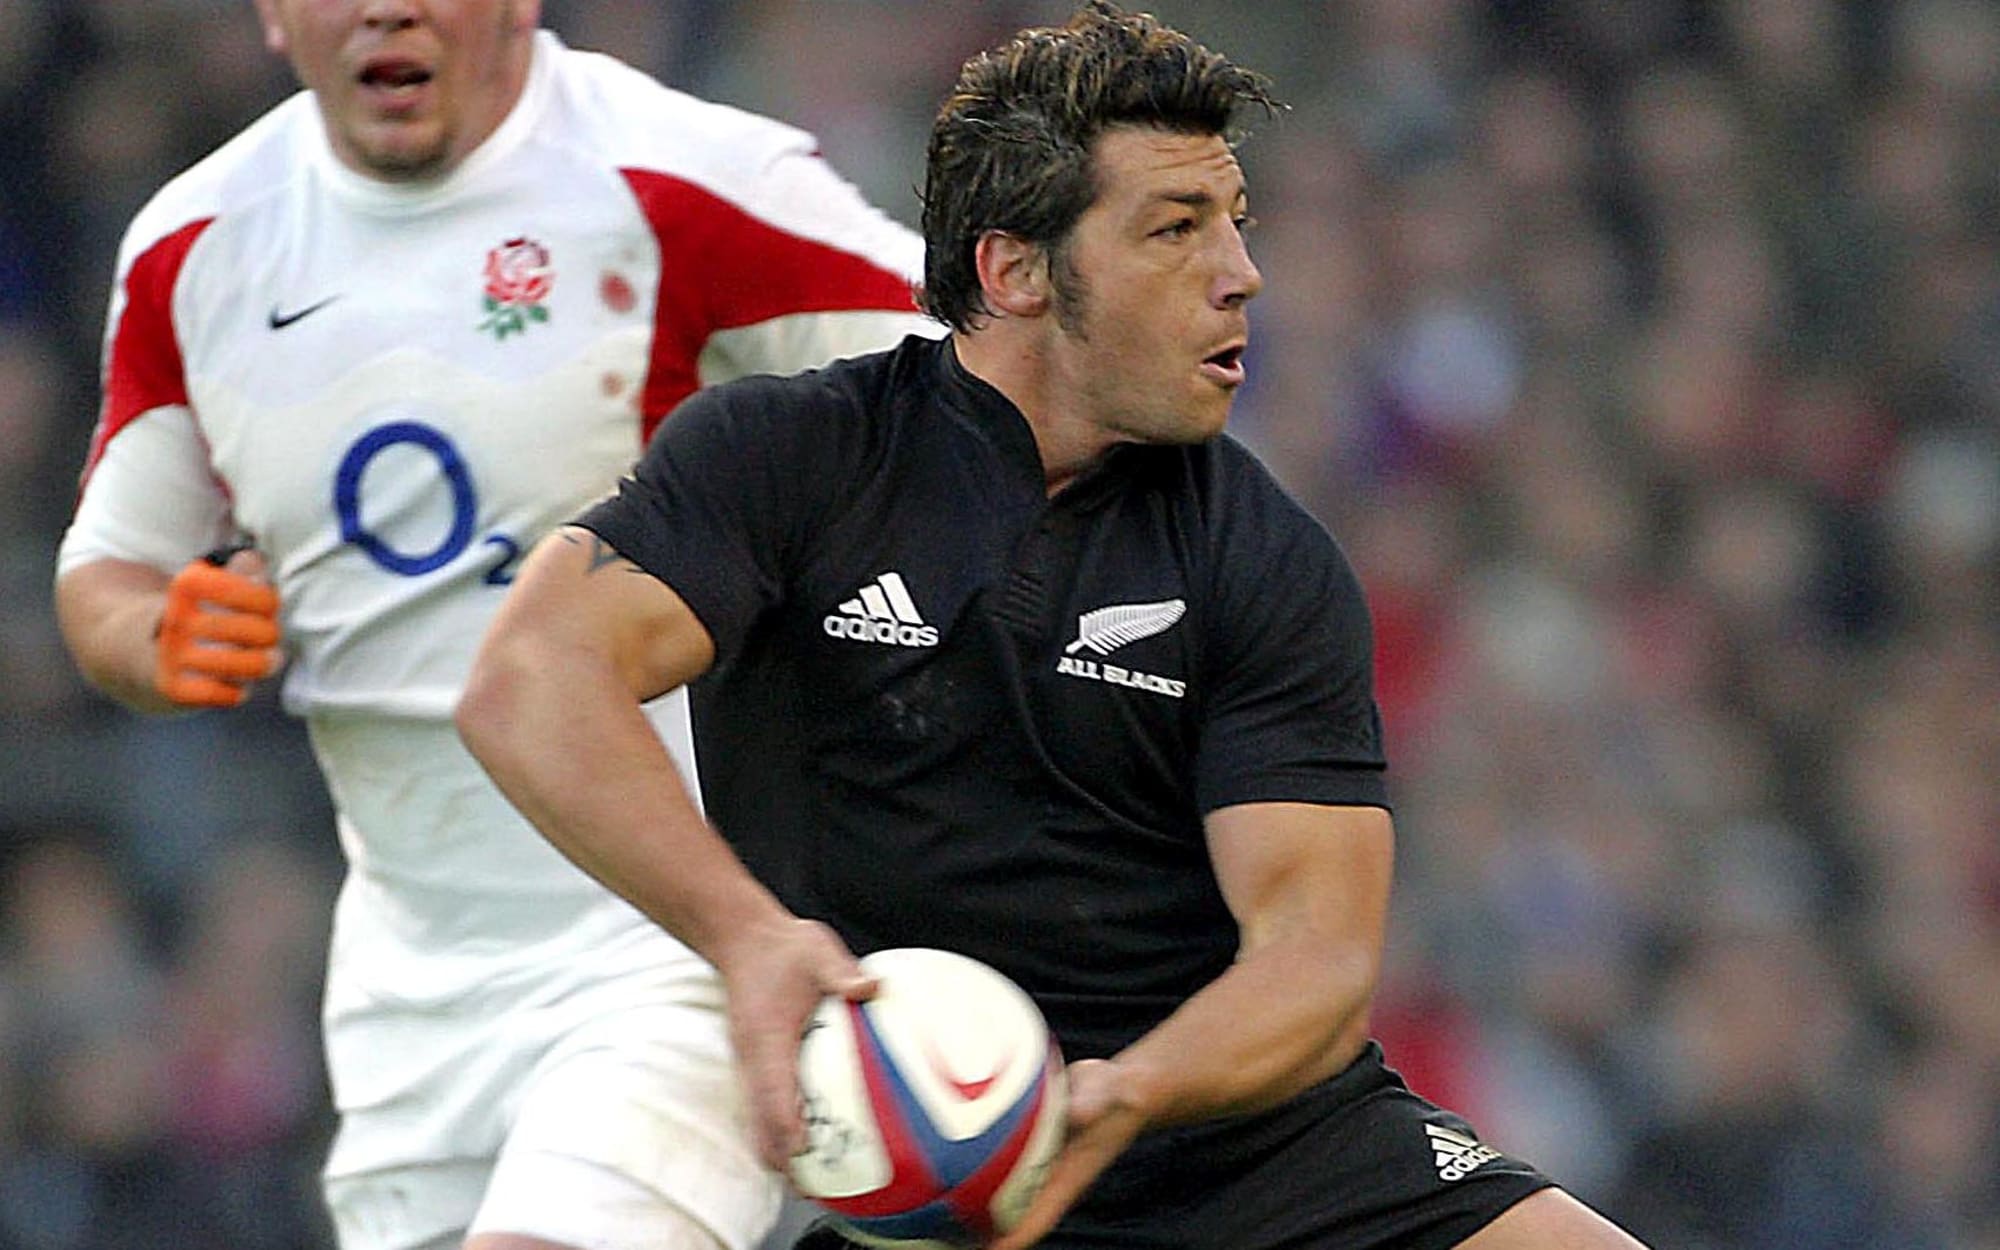 Byron Kelleher playing for the All Blacks against England in 2005.